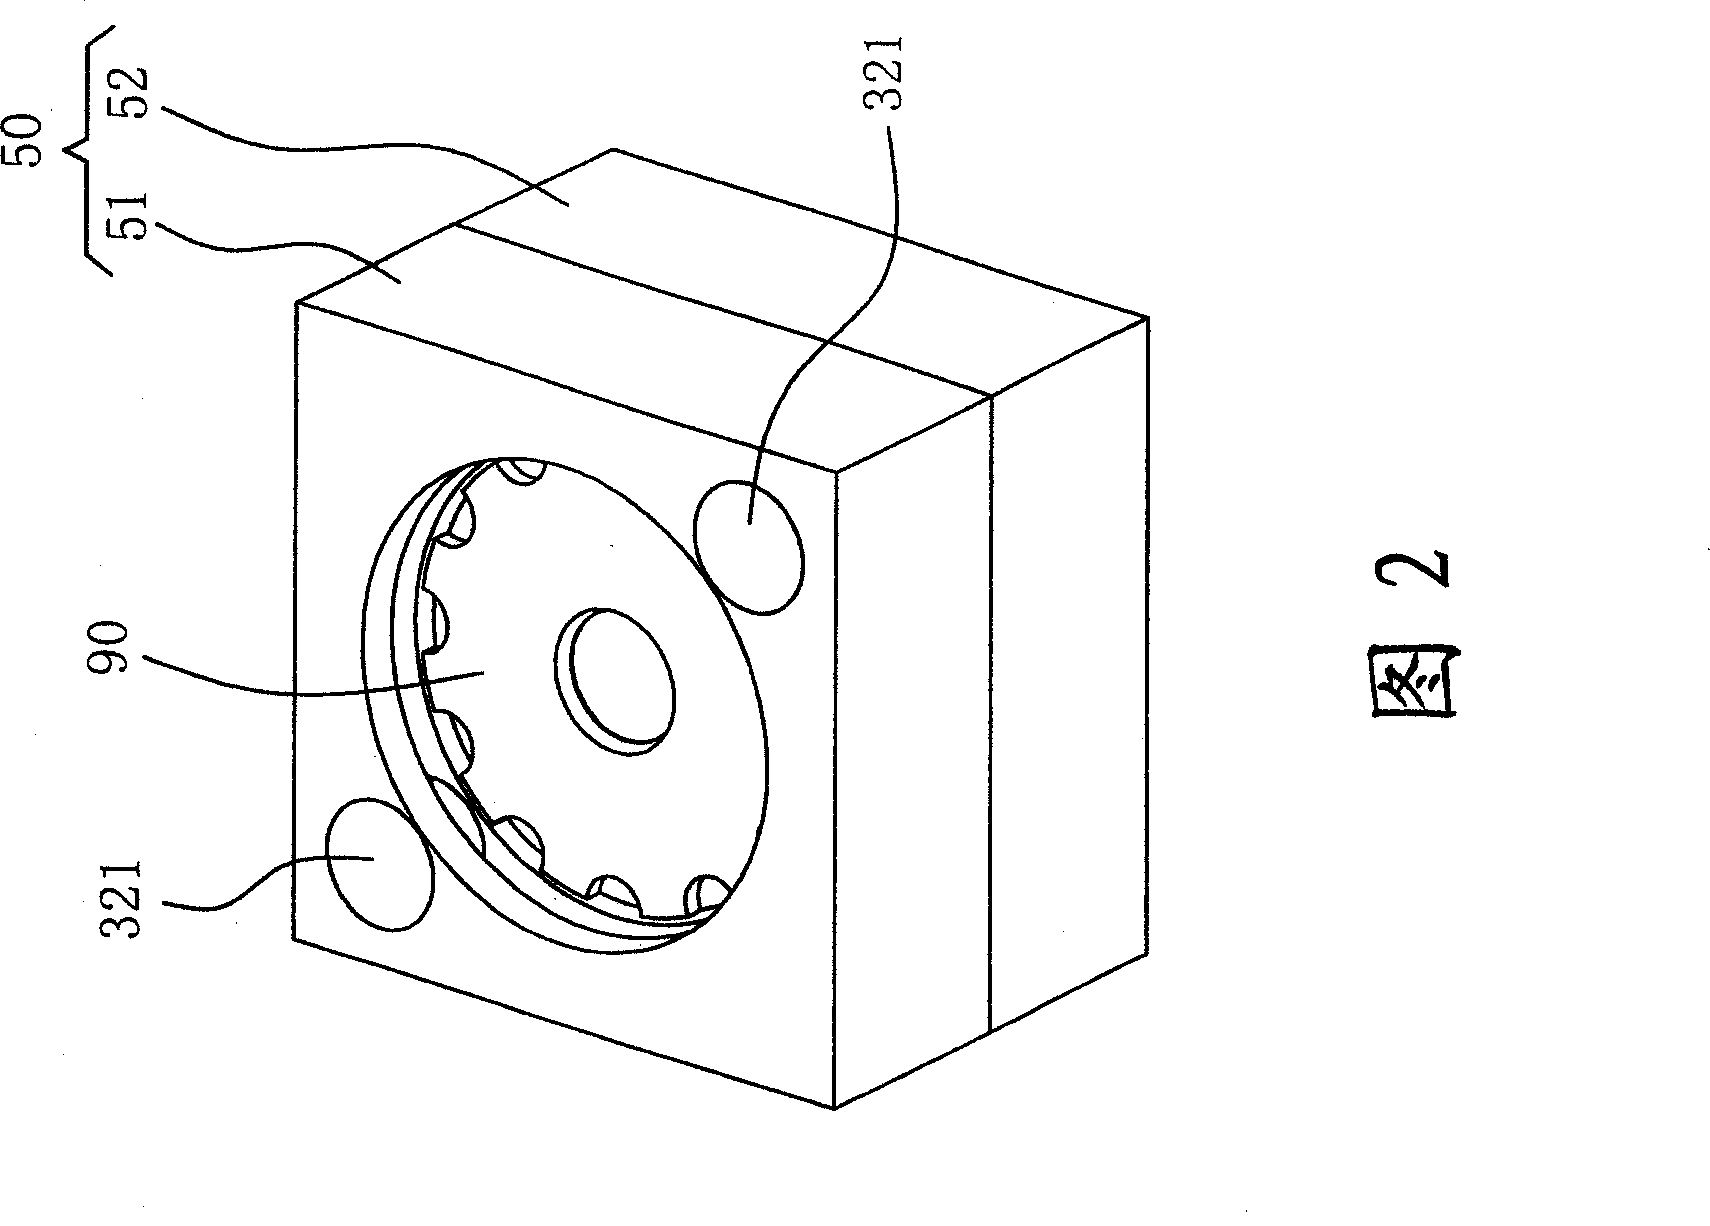 Two-section lens driver